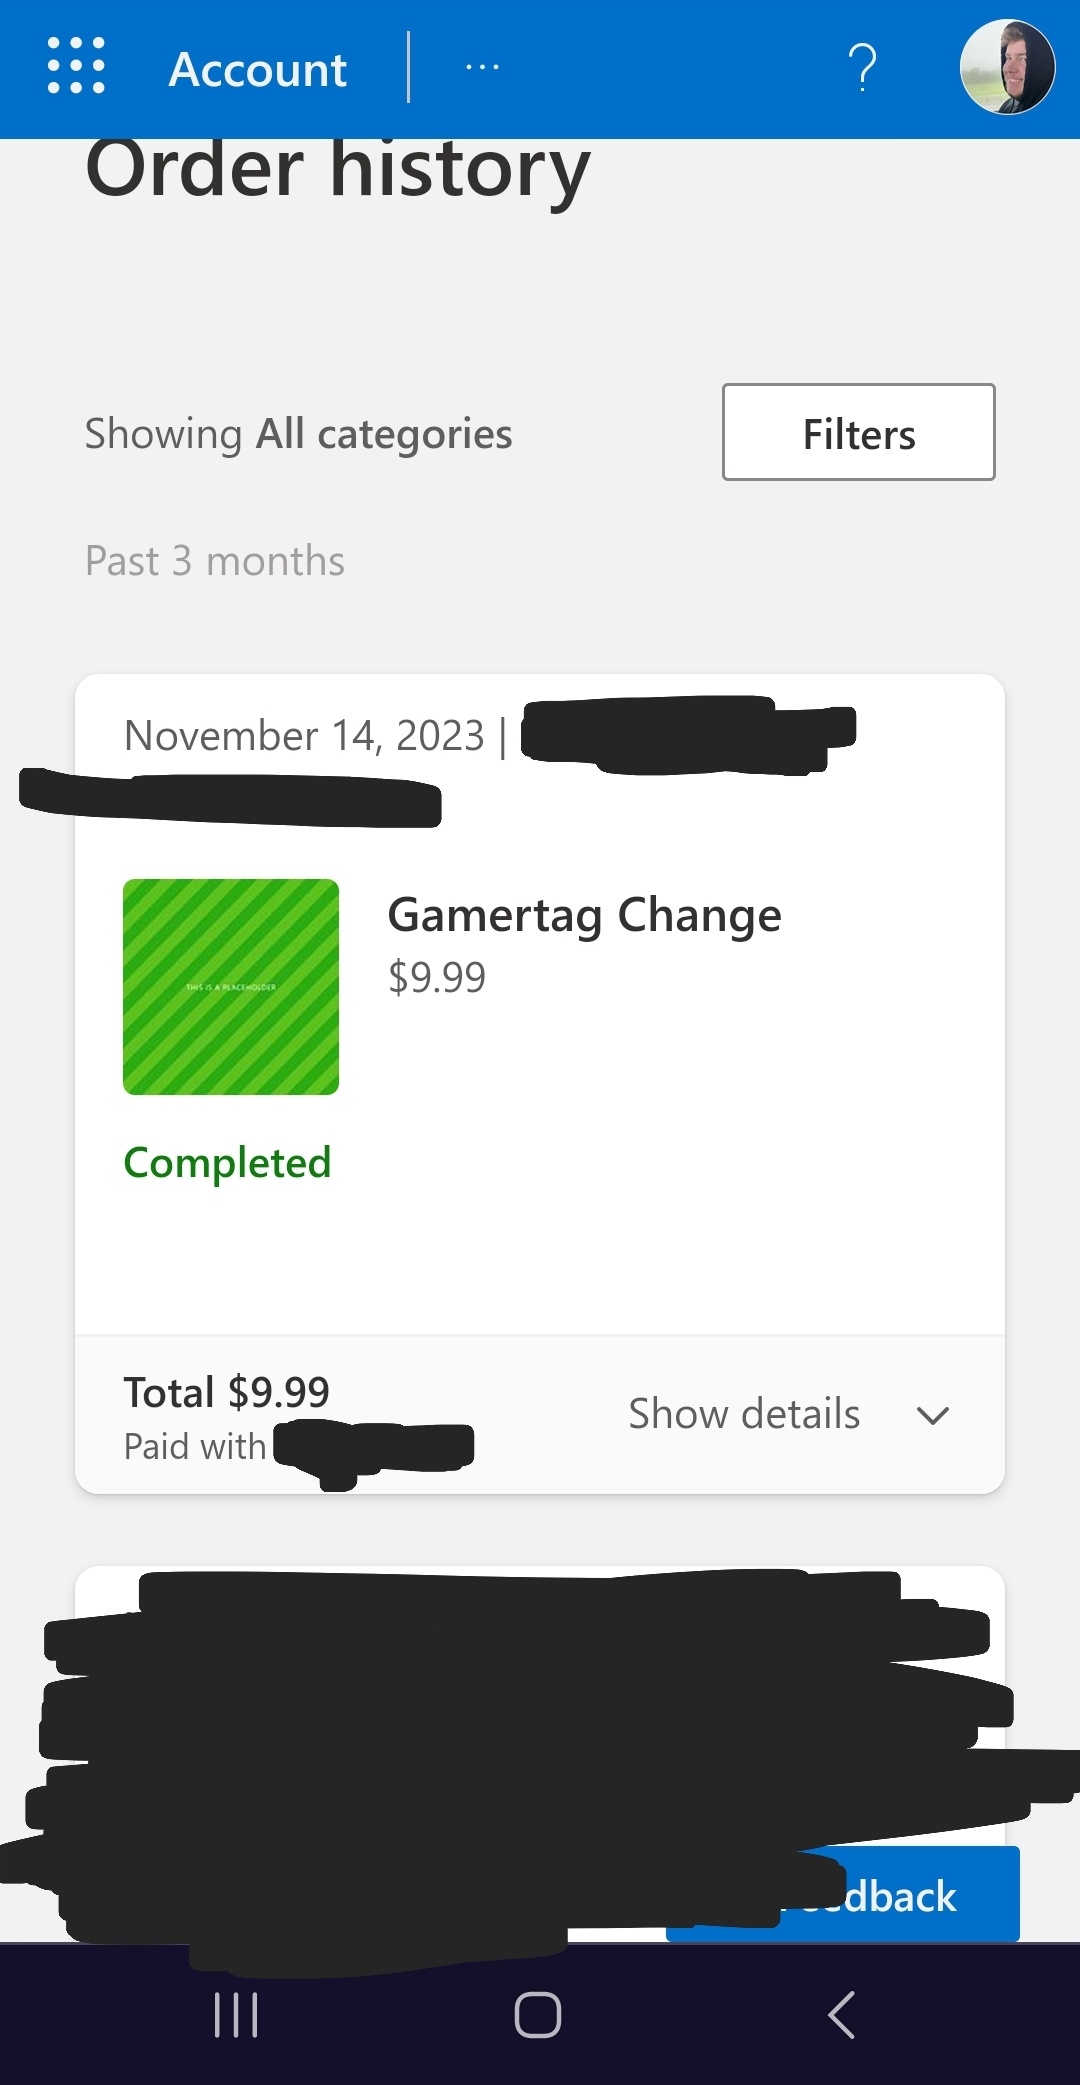 I have 2 gamertags on my microsoft account. How do I switch